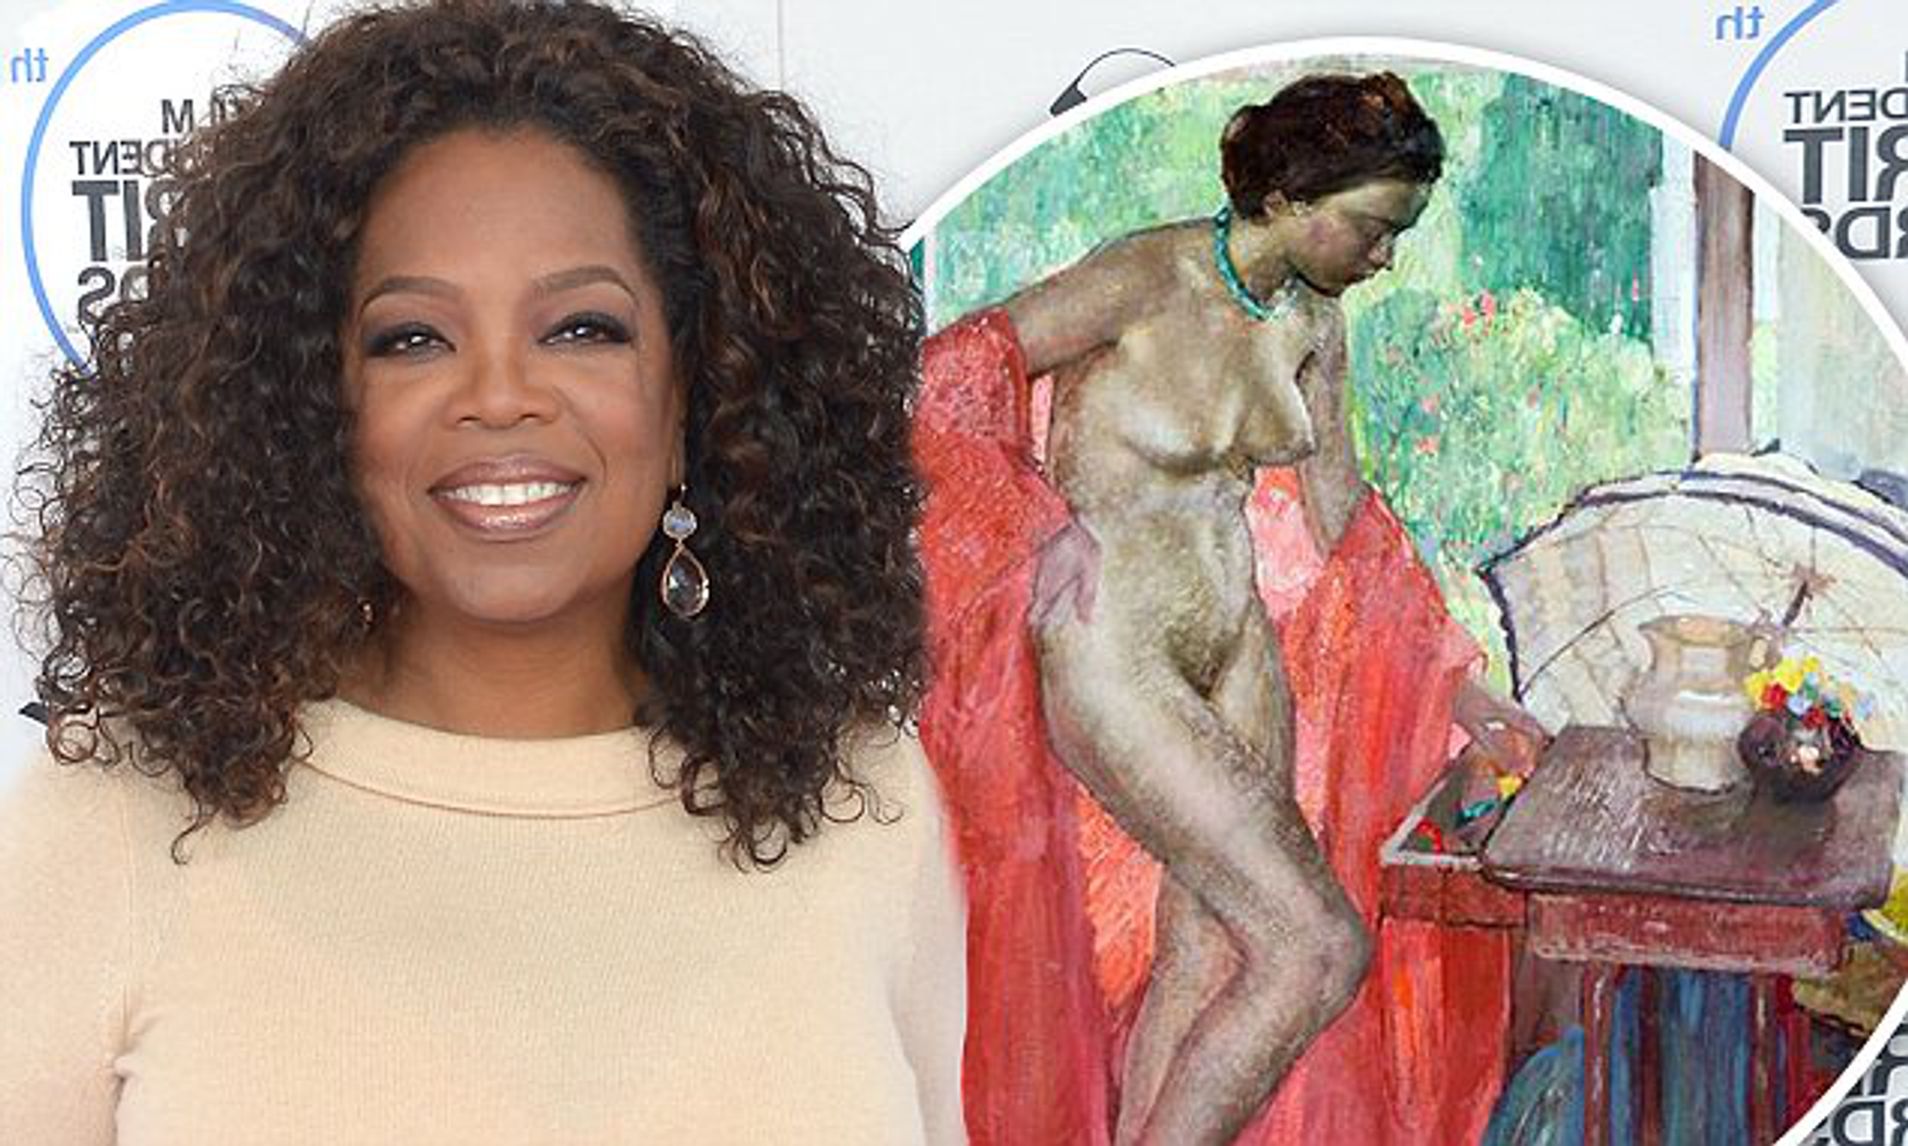 dolores nickel recommends oprah winfrey naked pics pic